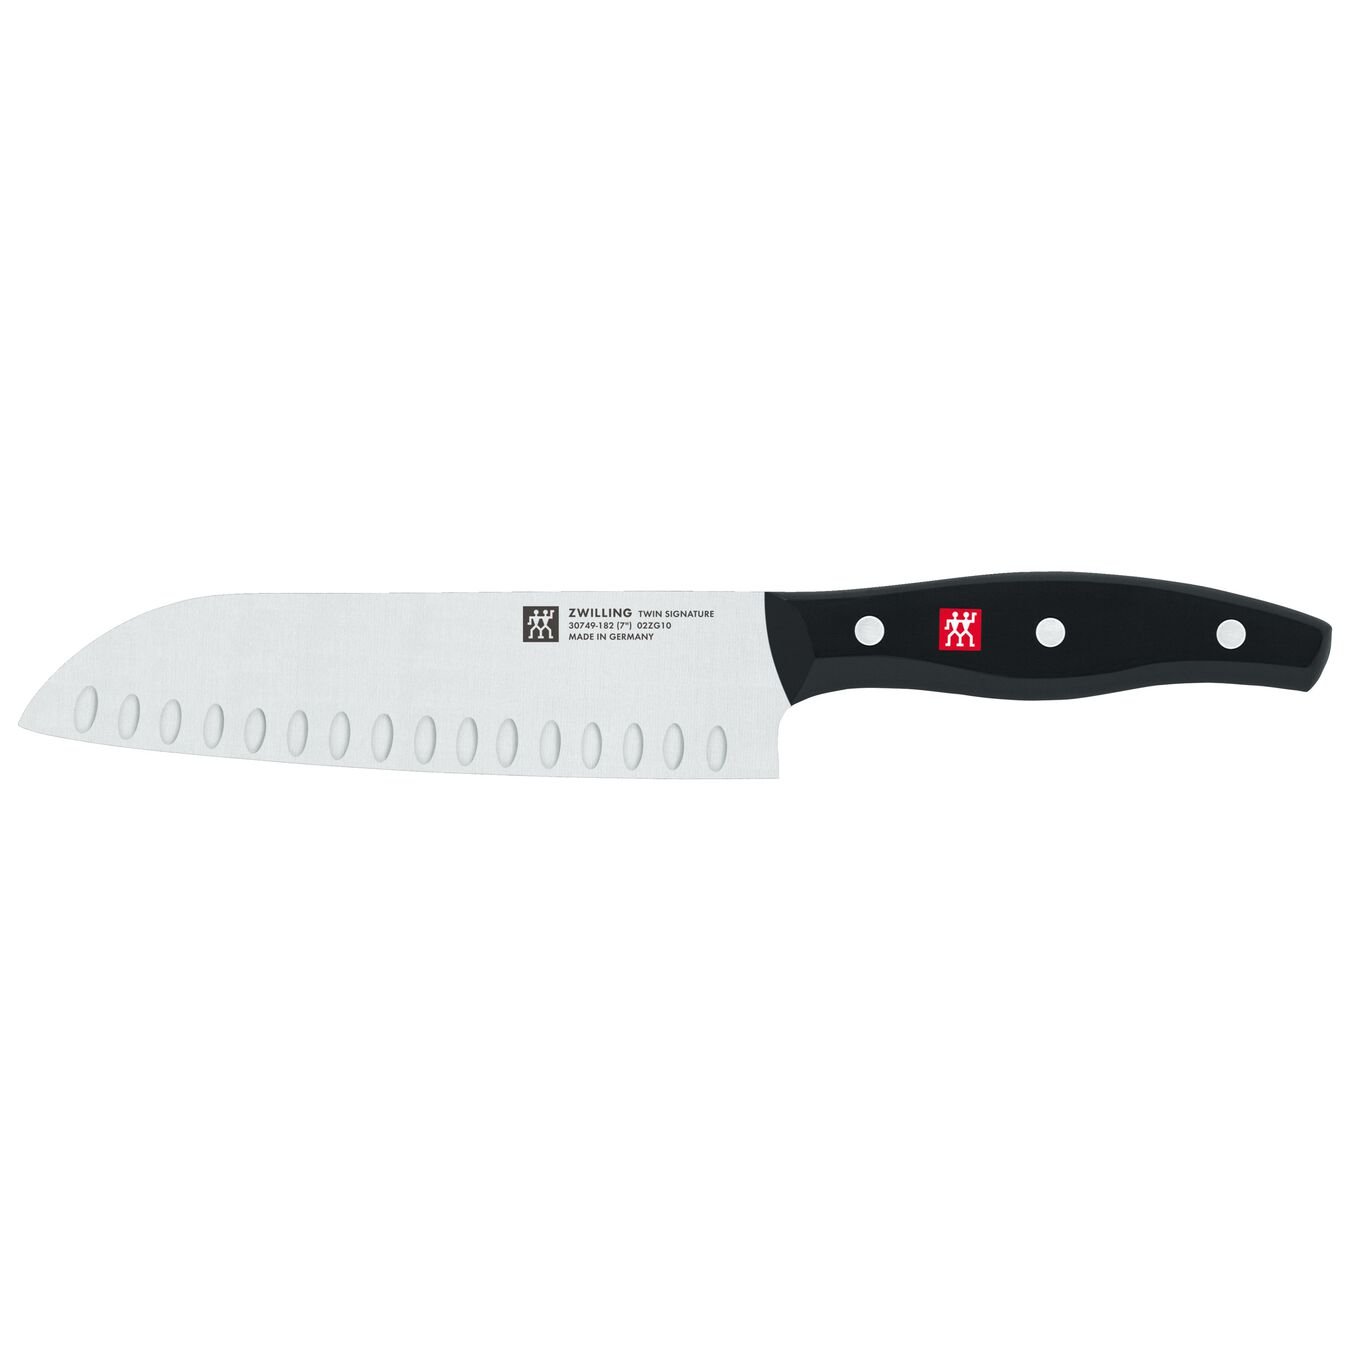 Zwilling Knives: 7" Santoku Knife, 3" Paring Knife, 8" Chef's Knife + More + Free Shipping on $59+ $6